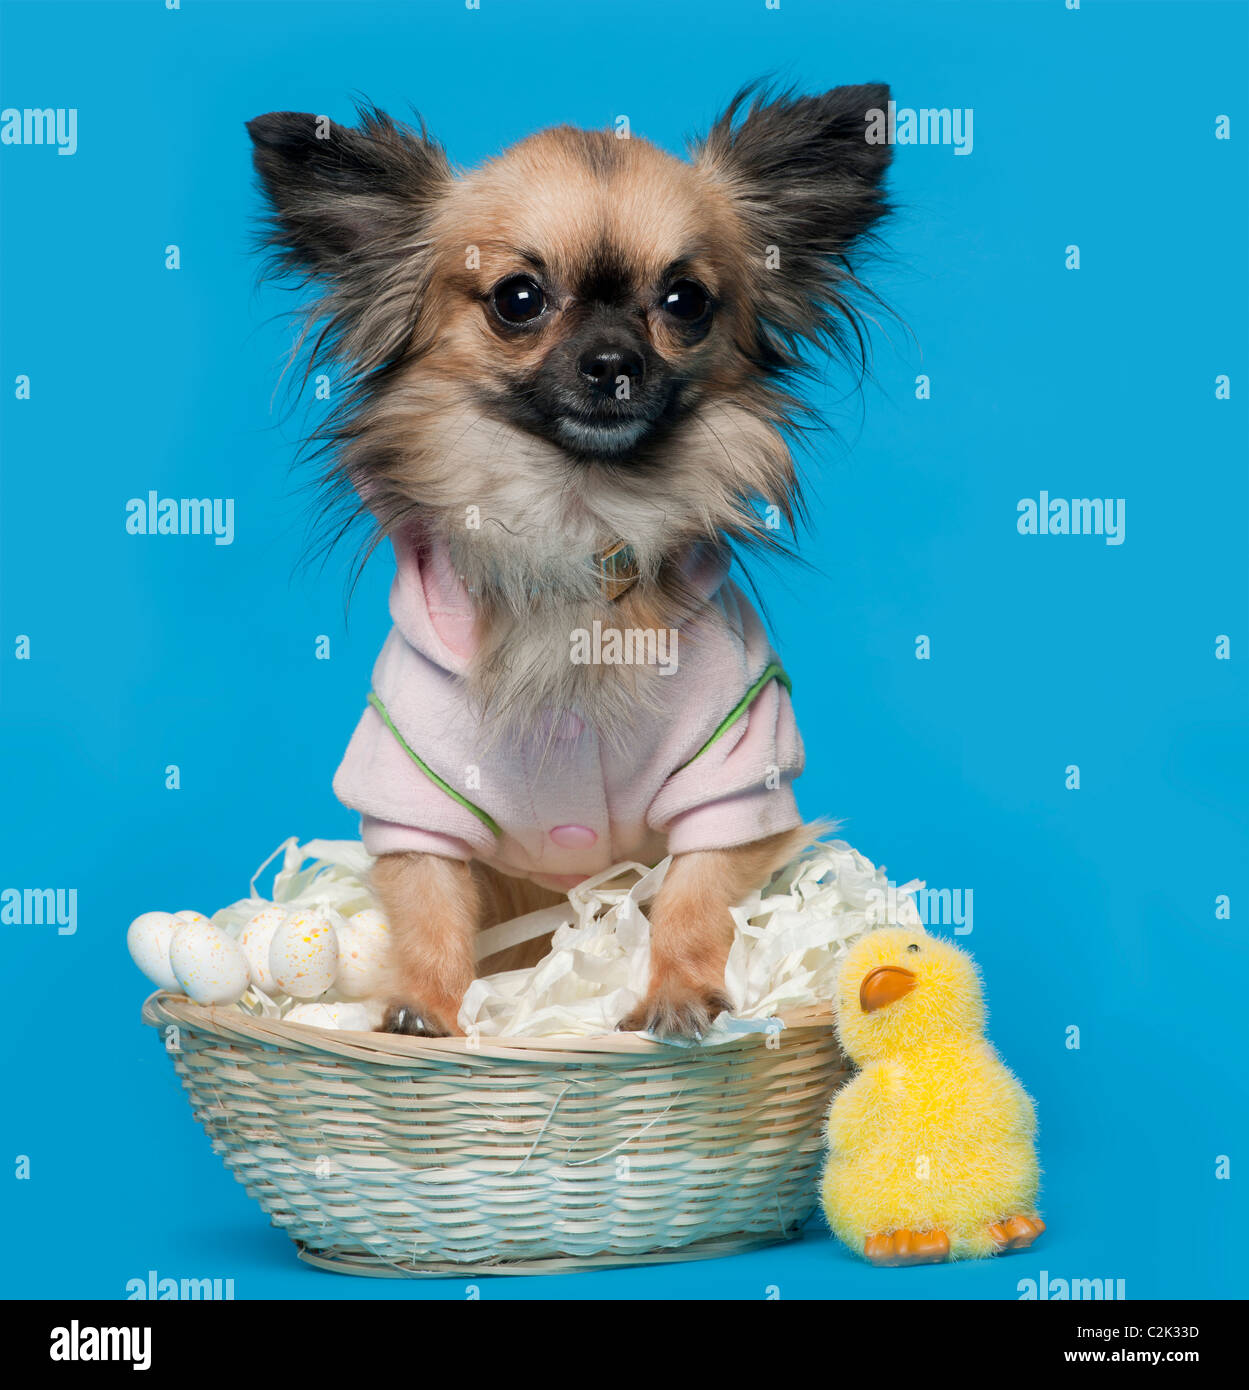 Chihuahua, 16 months old, sitting in front of blue background with Easter basket Stock Photo